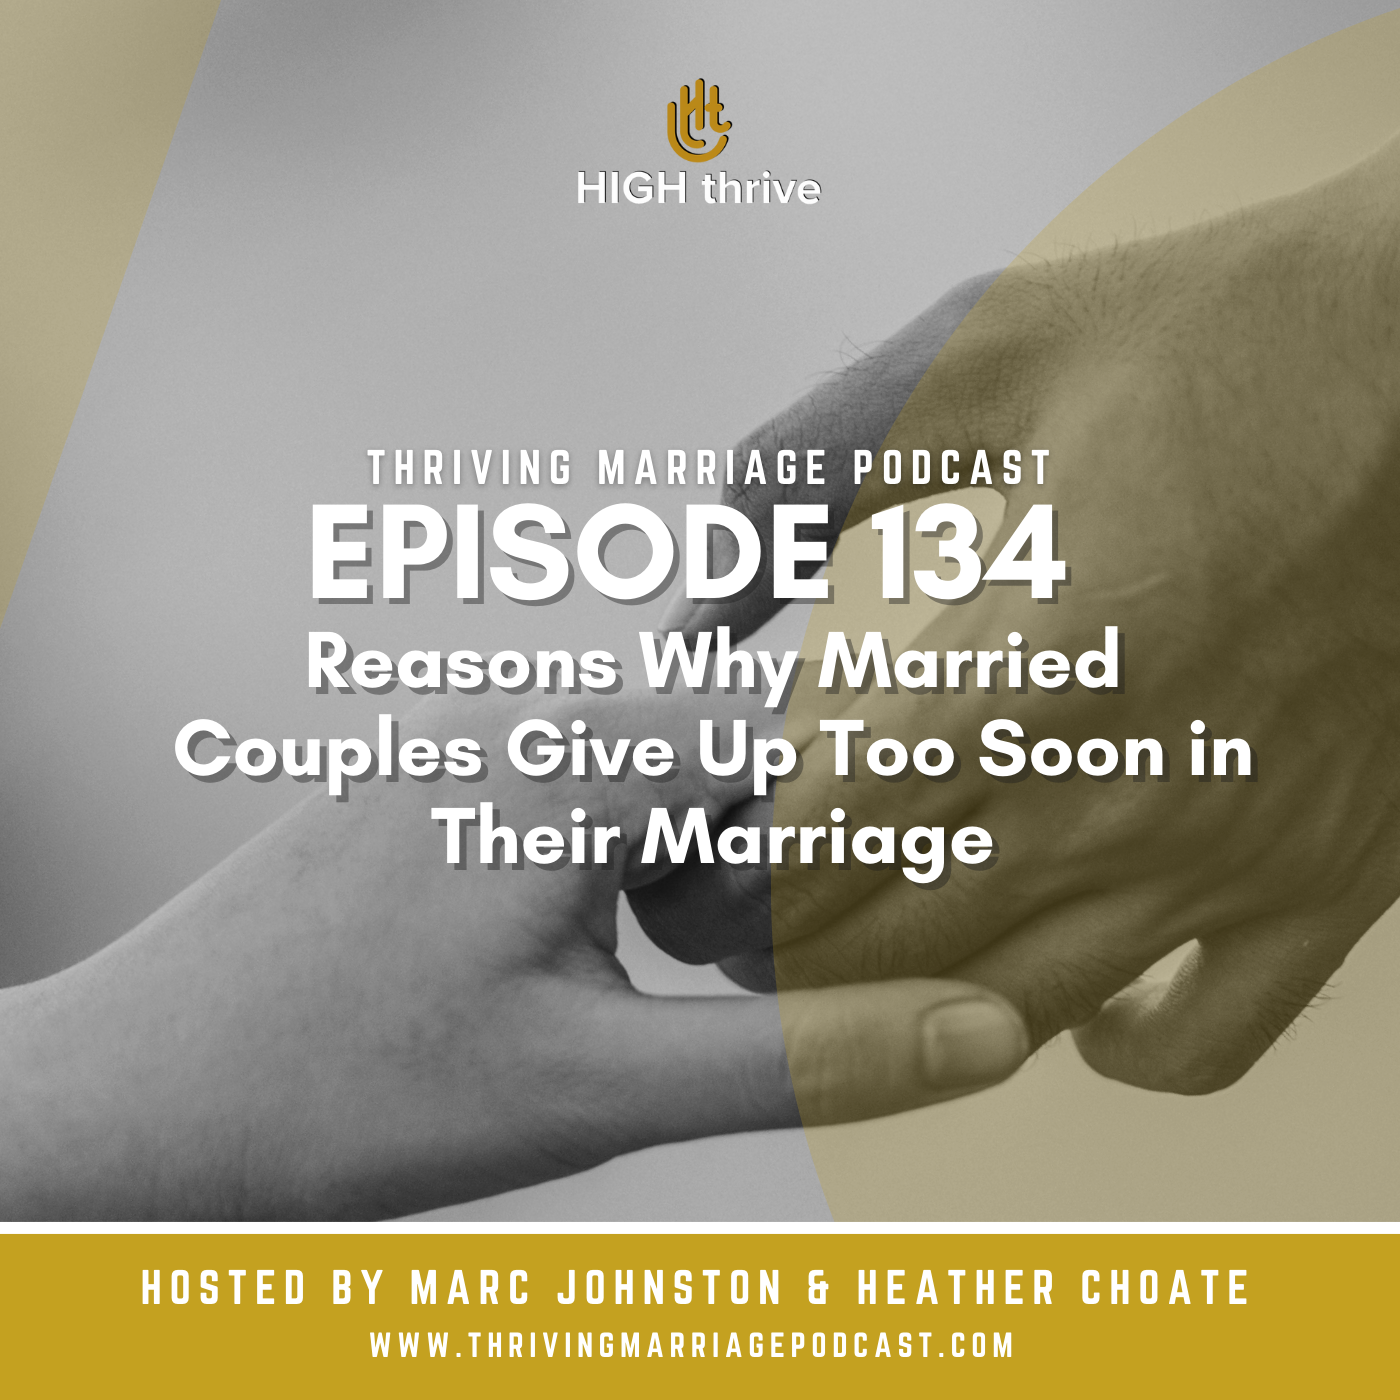 Episode 134: Reasons Why Married Couples Give Up Too Soon in Their Marriage